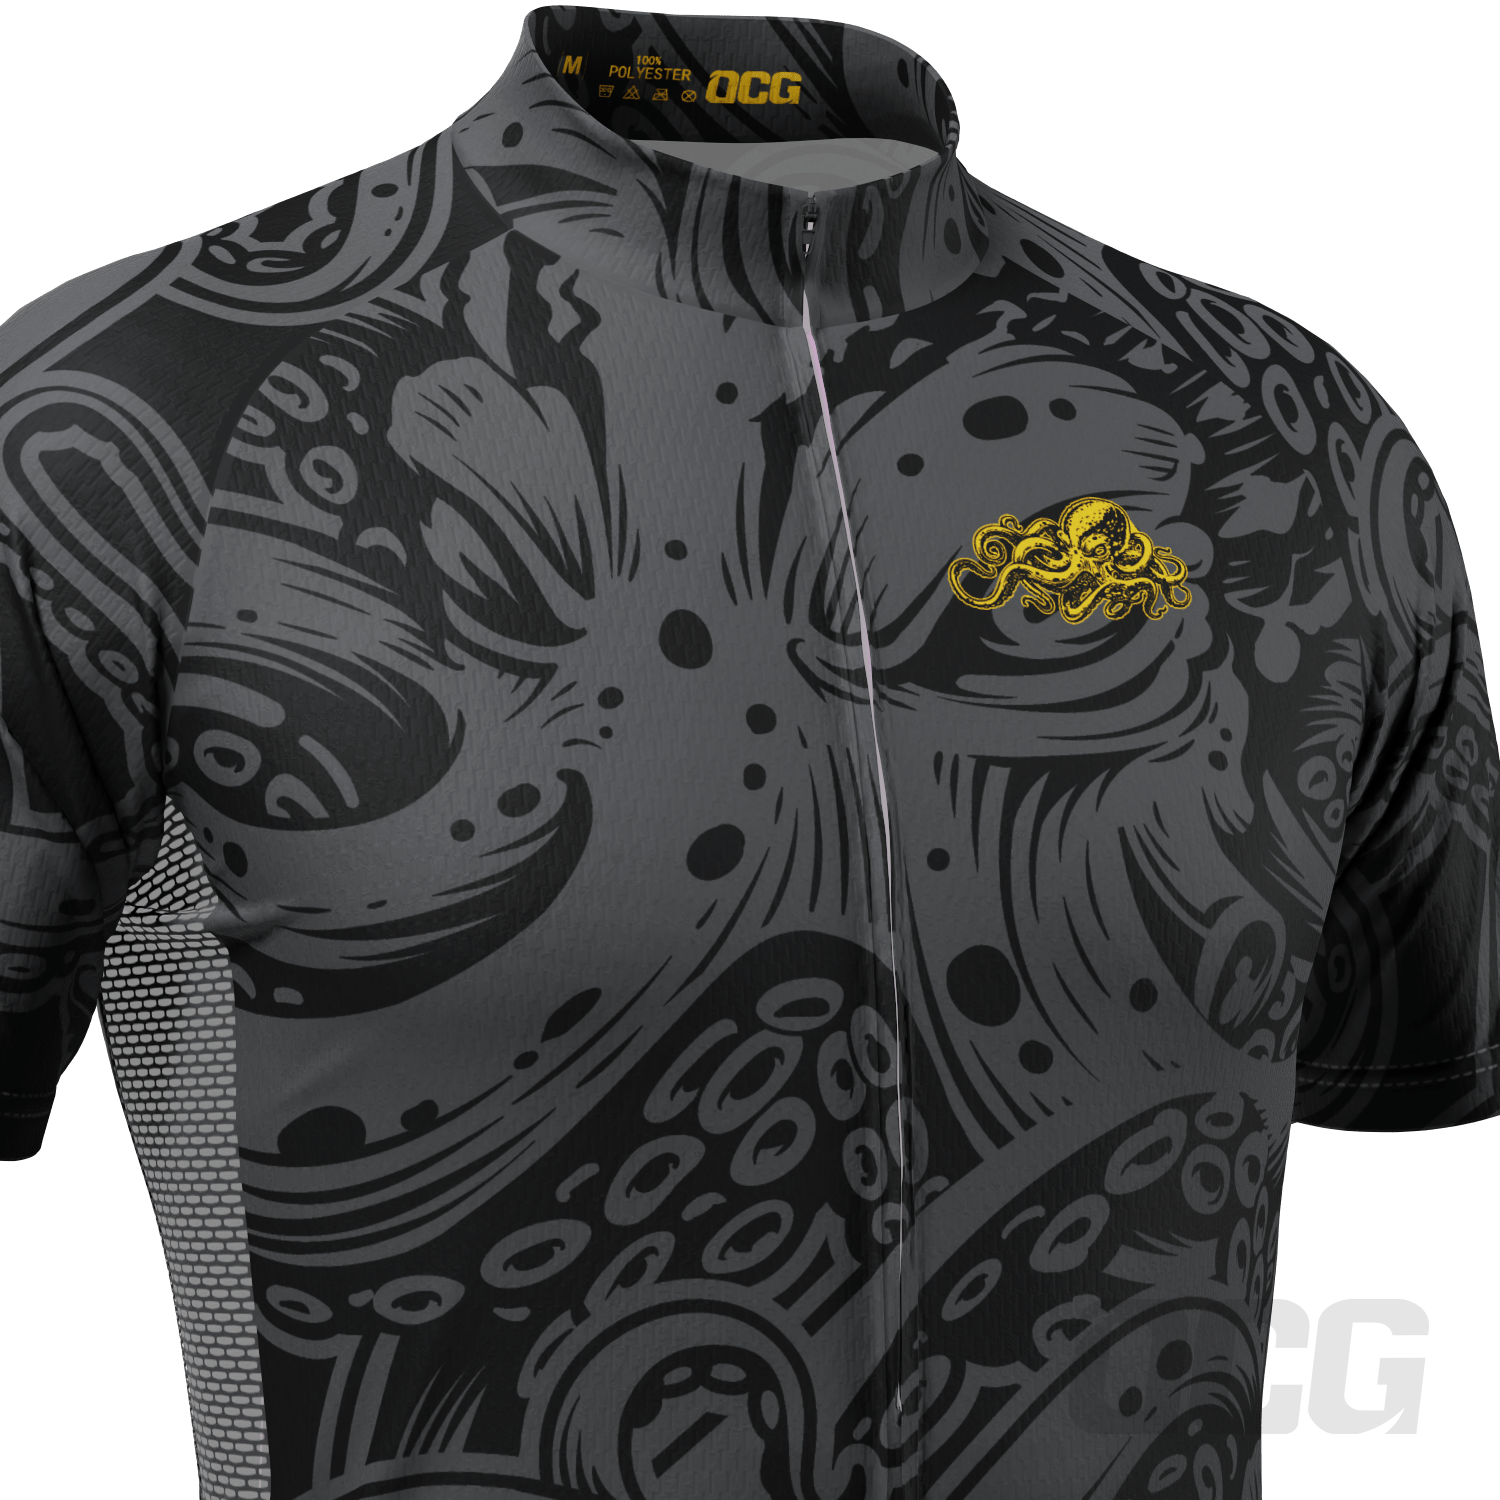 Men's The Black Octopus Short Sleeve Cycling Jersey